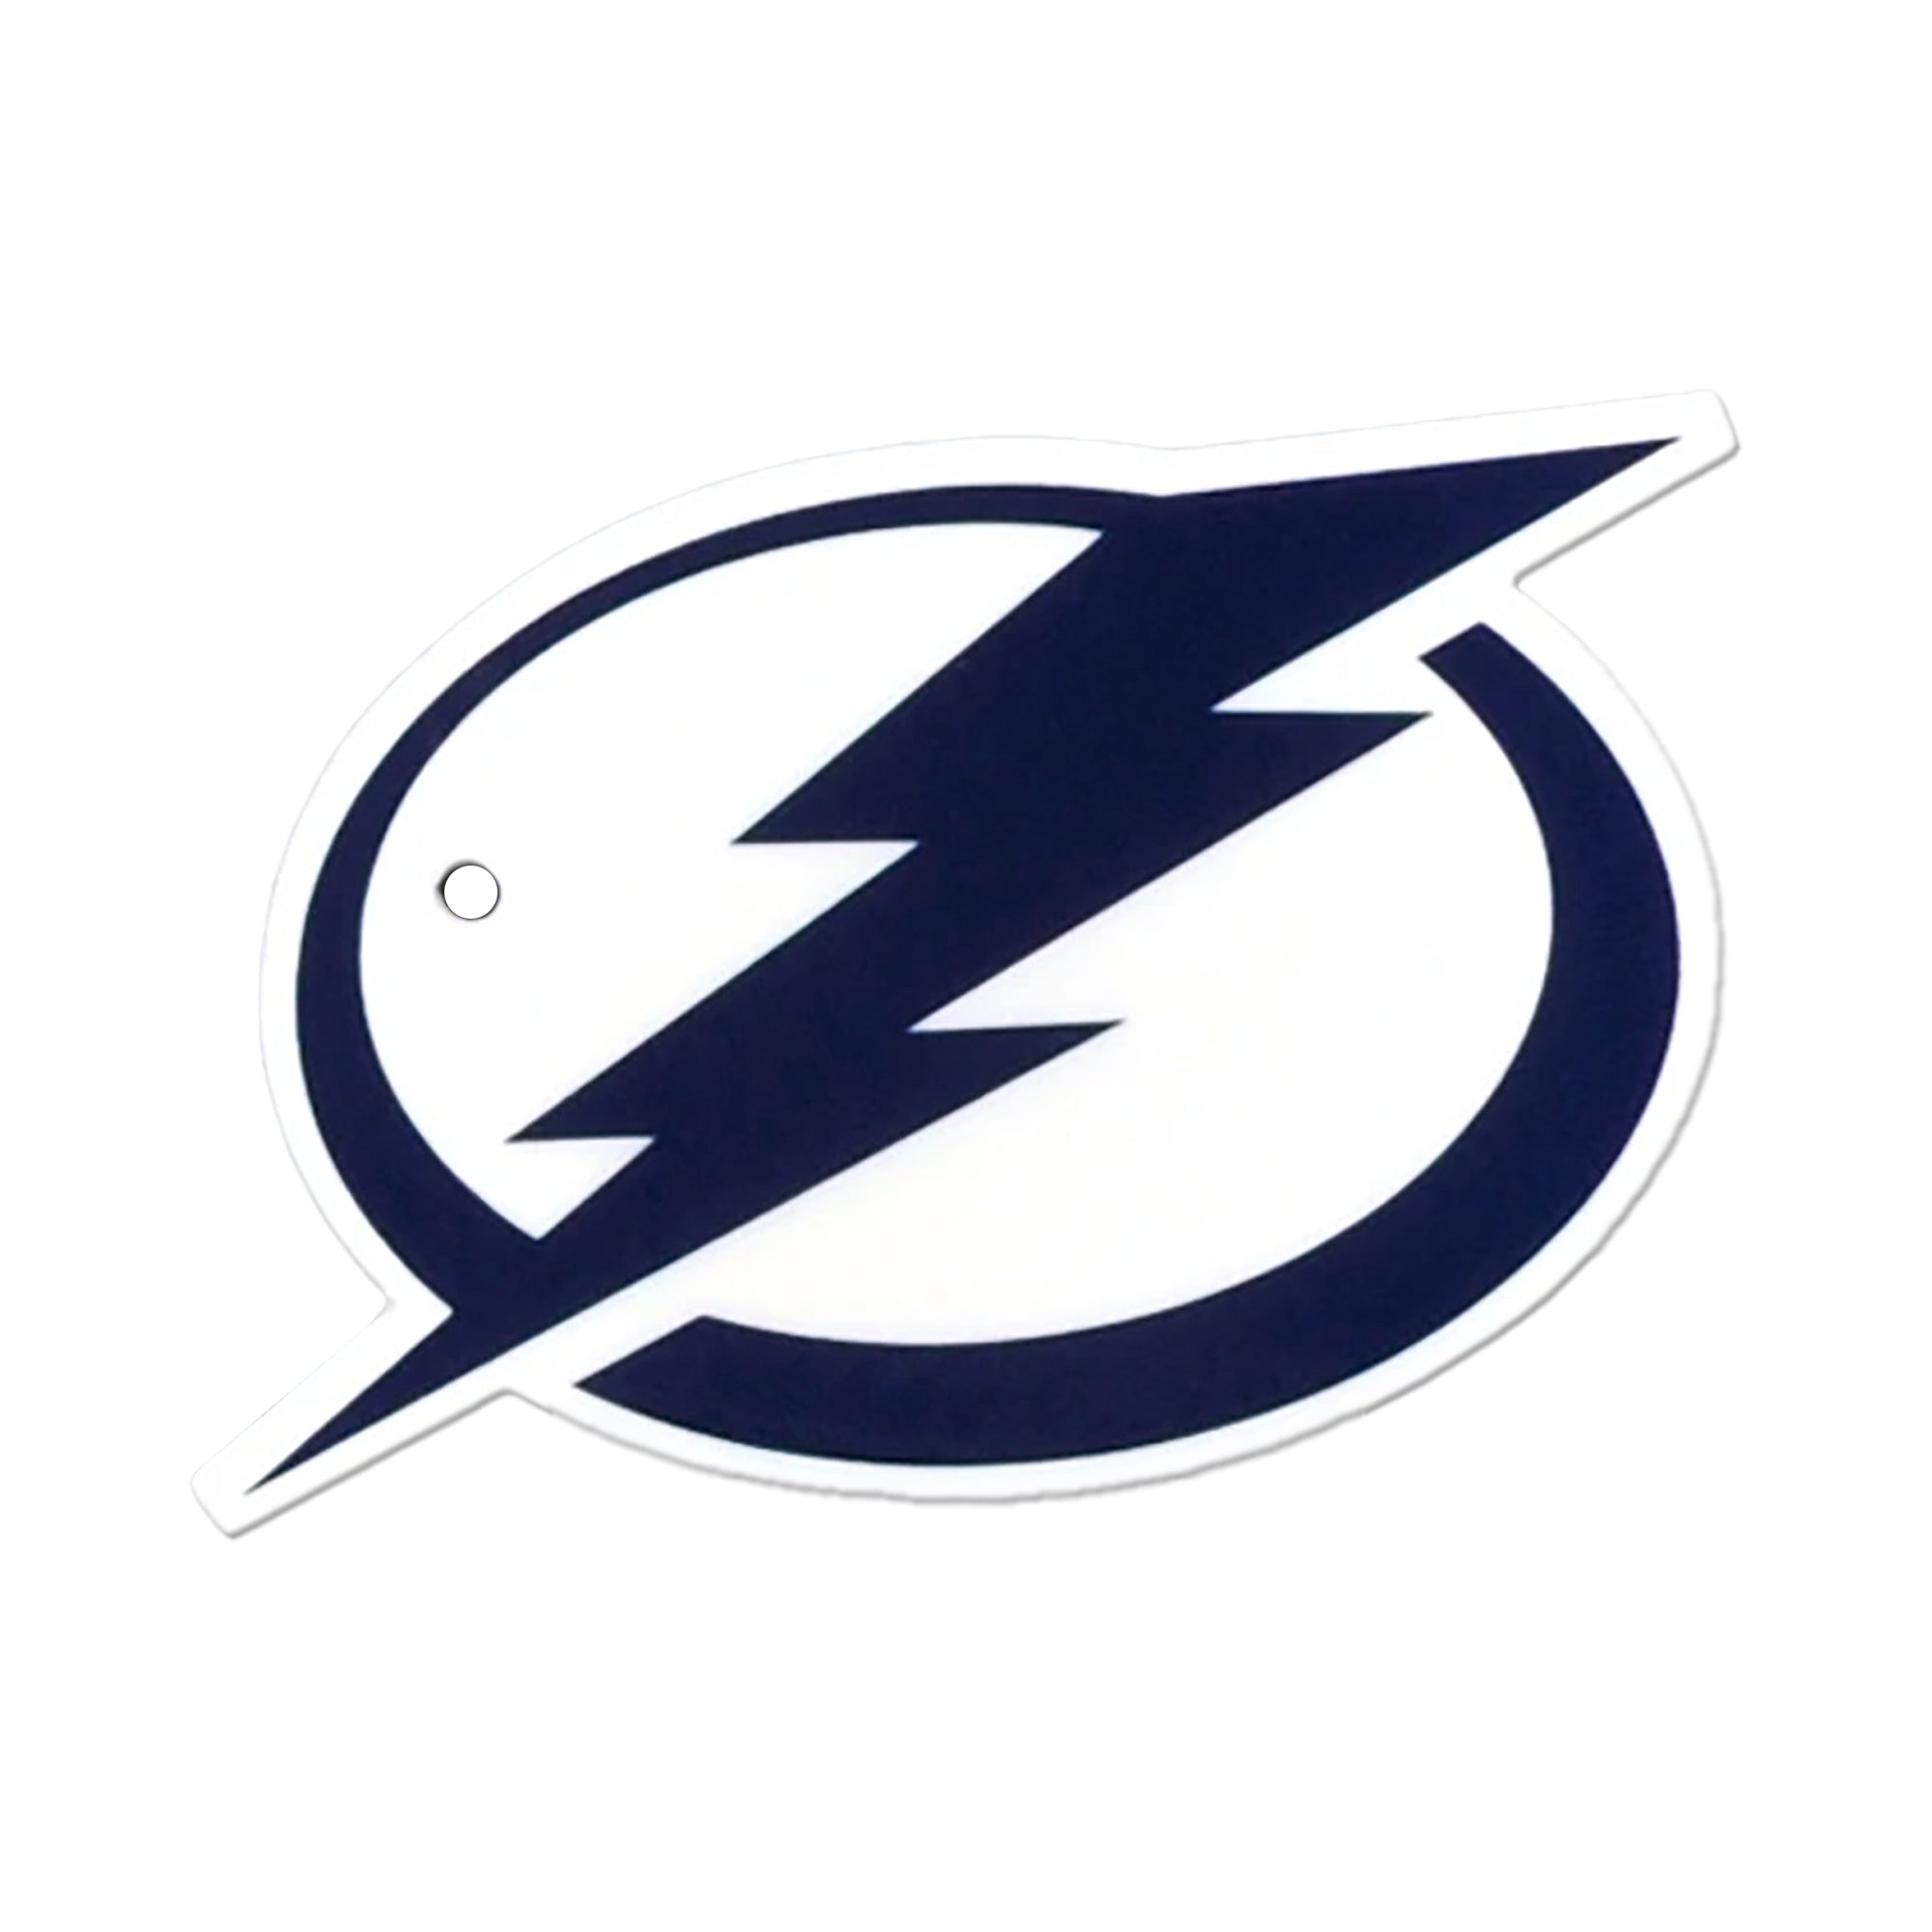 Lightning used Virginia Cavaliers as inspiration for Stanley Cup